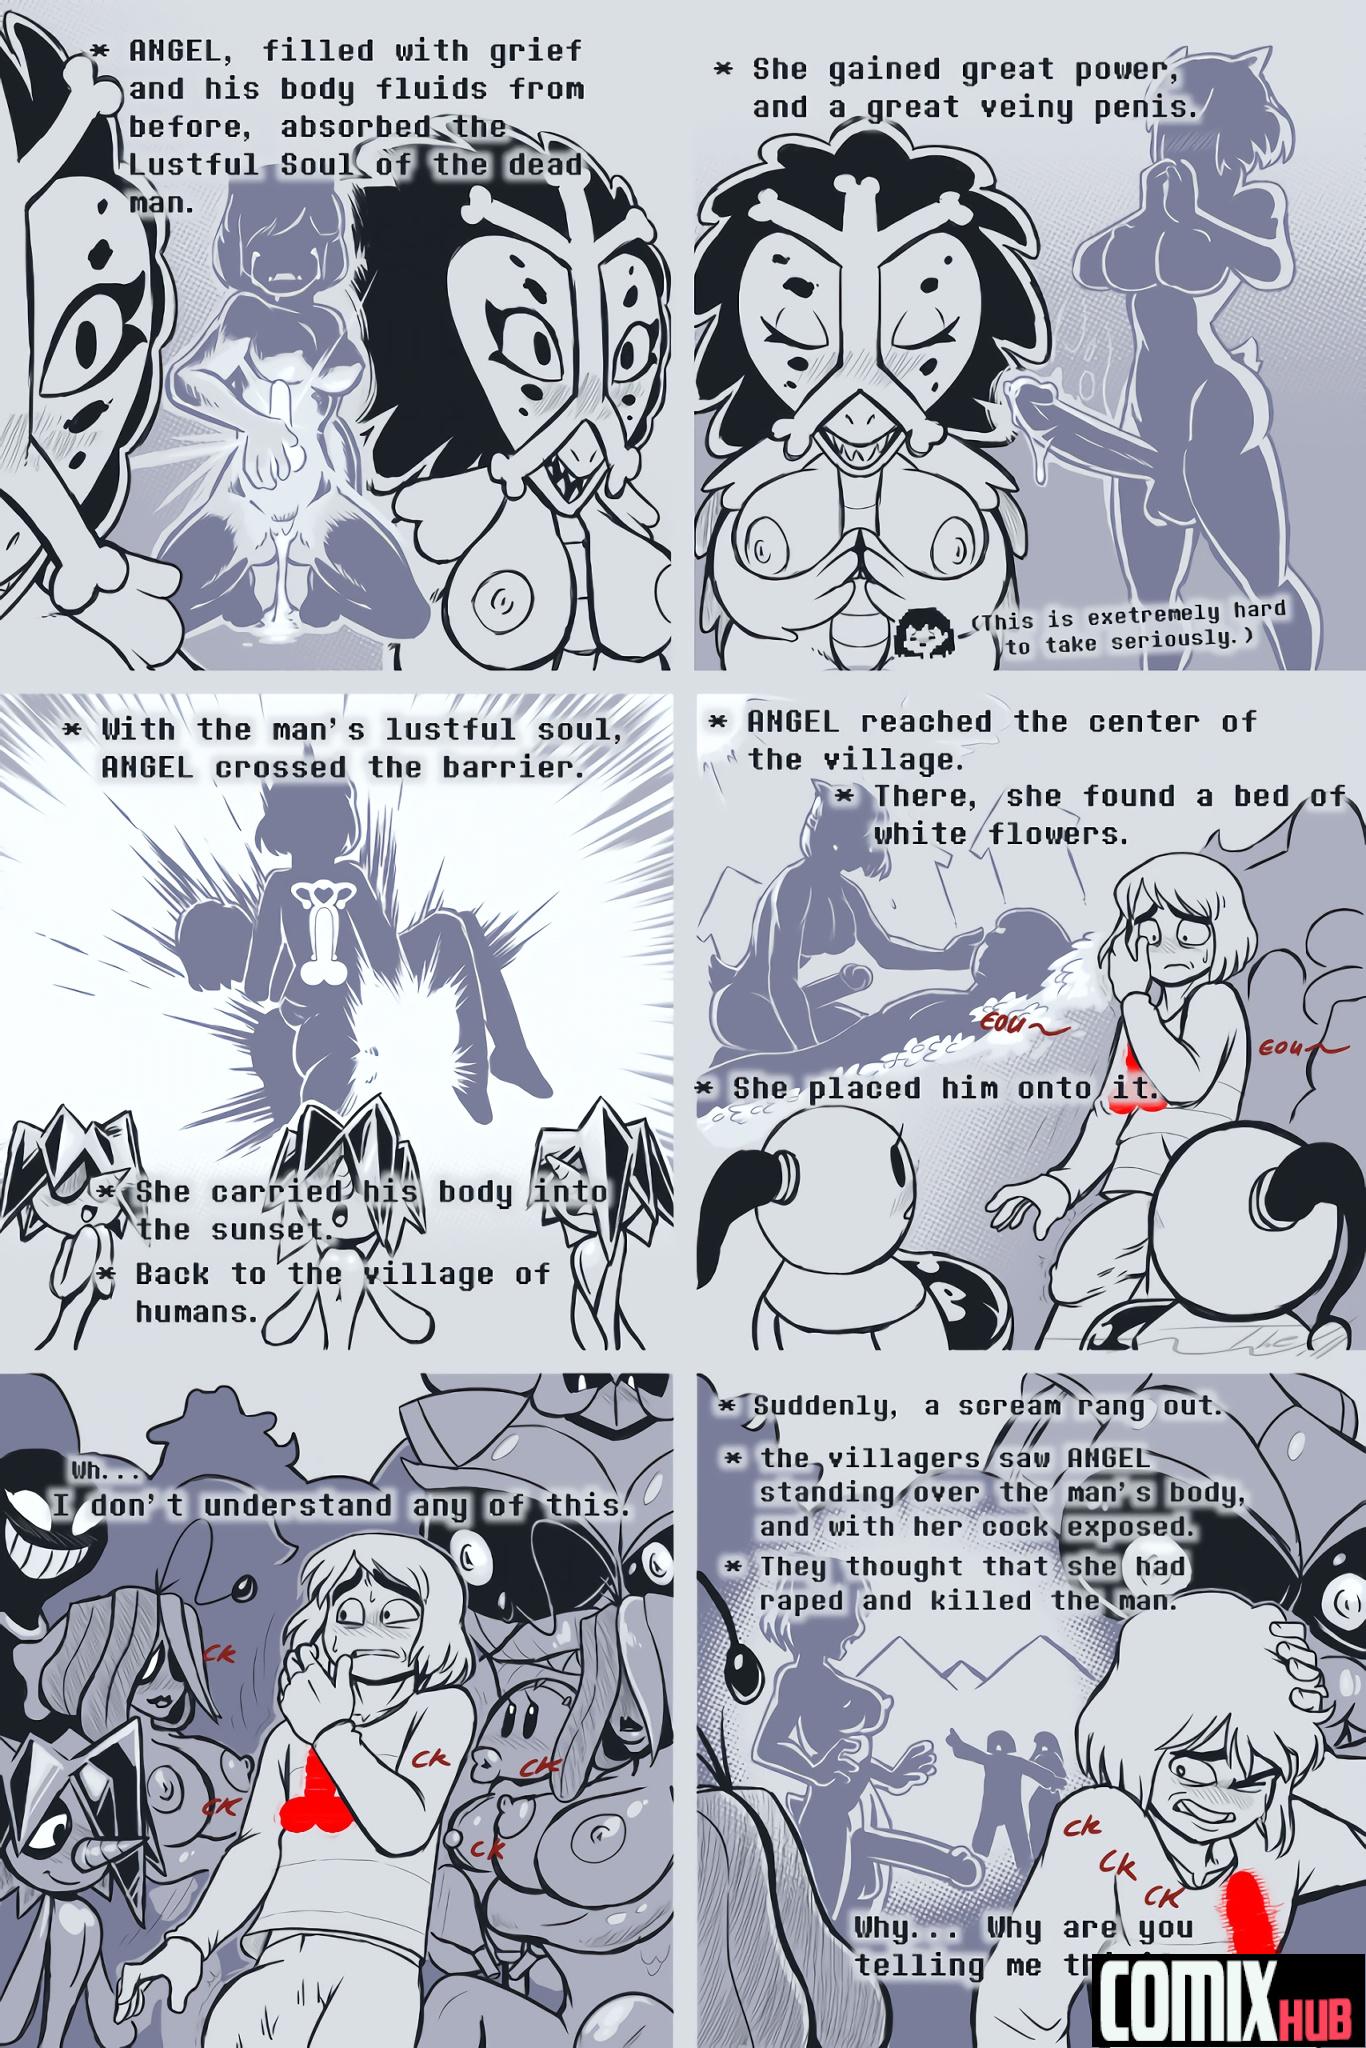 Porn Comics, Under(her)tail Monster-GirlEdition 7 Fantasy, Furry, Straight